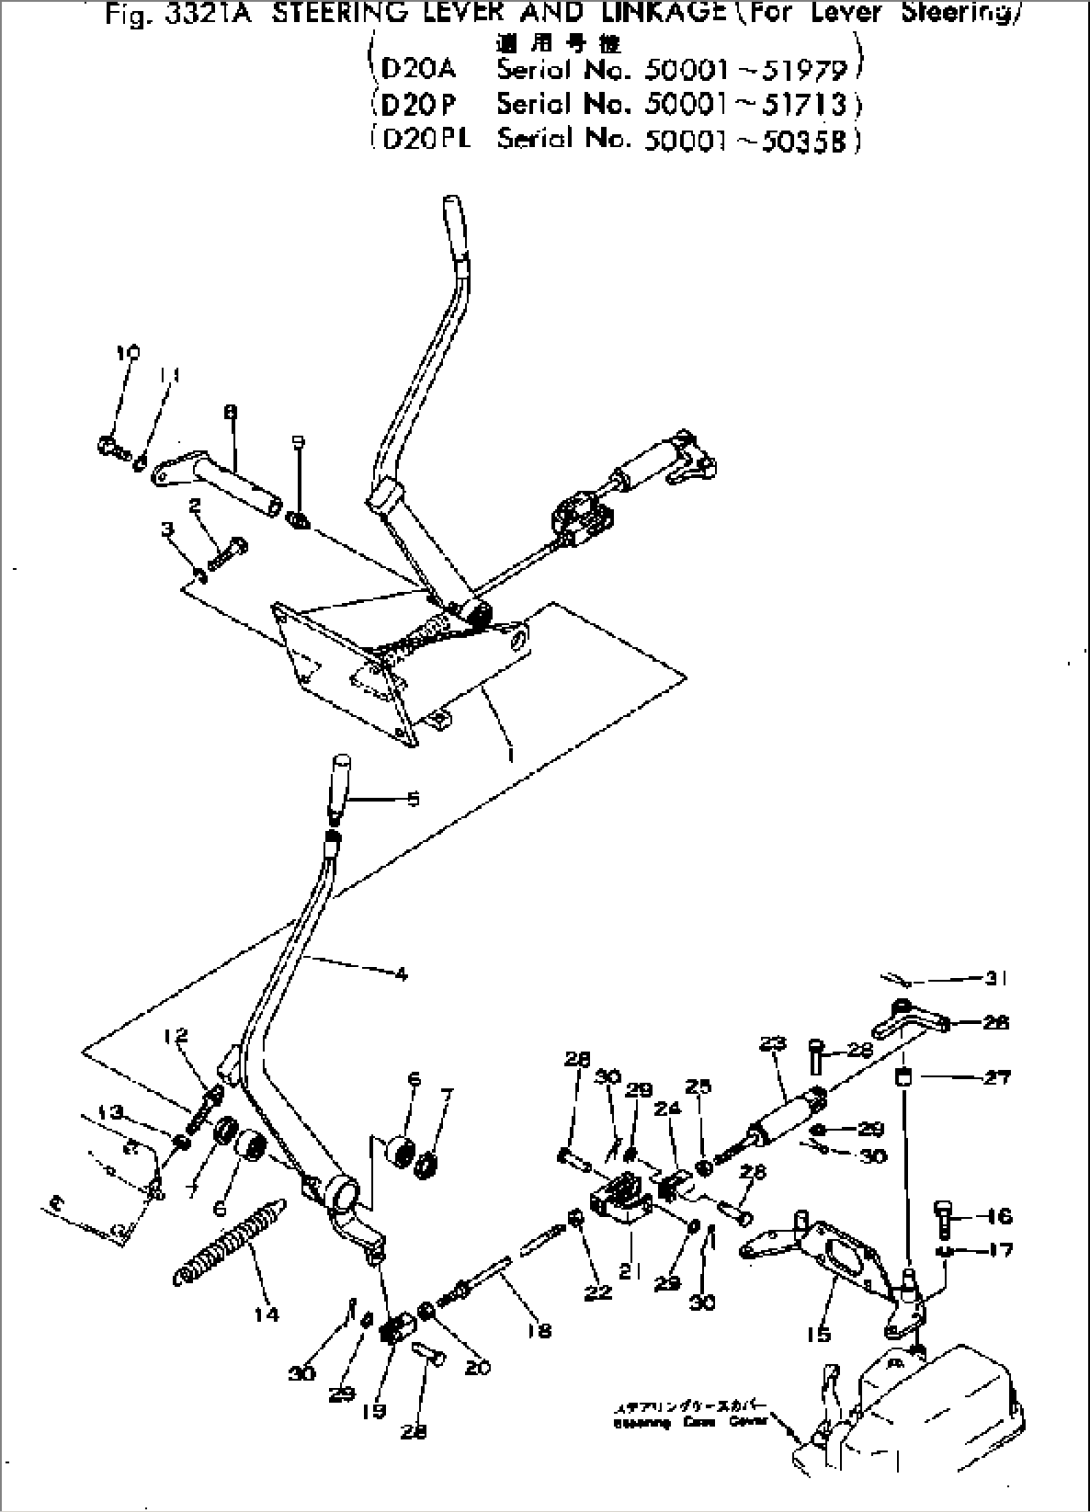 STEERING LEVER AND LINKAGE (FOR LEVER STEERING)(#50001-51979)